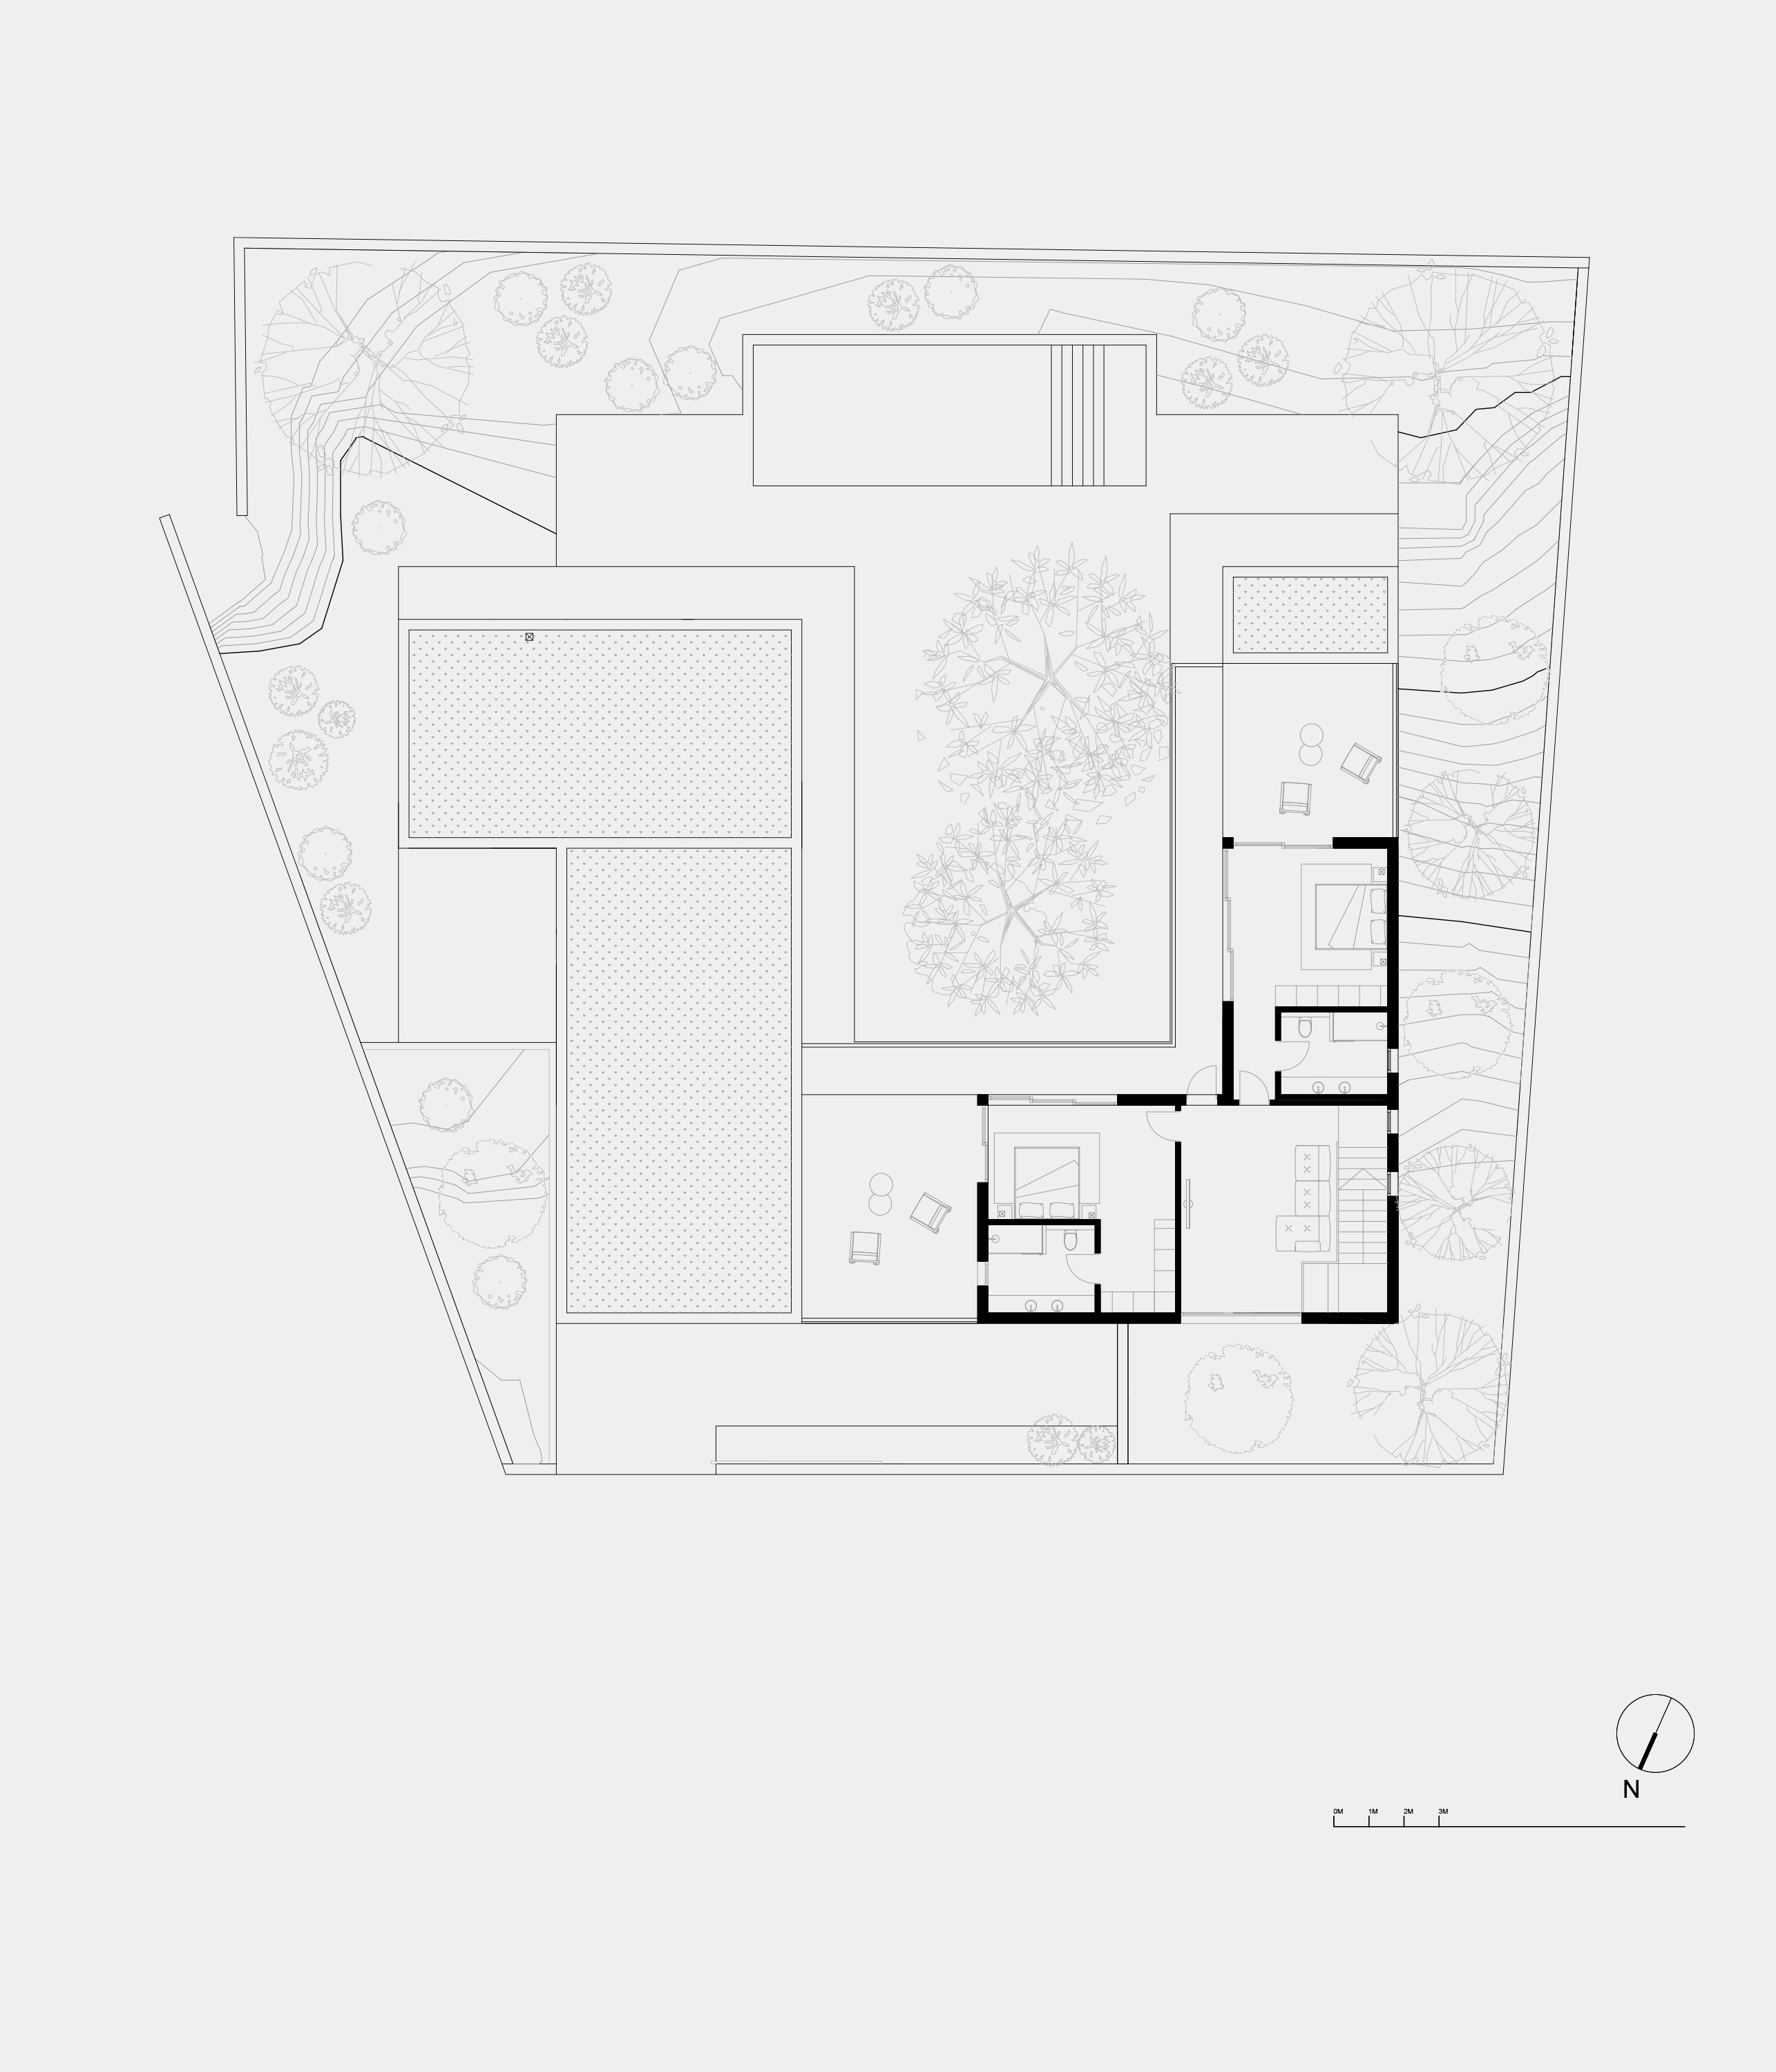 IA2035 - PATIO HOUSE - First Floor, Proposed General Arrangment 